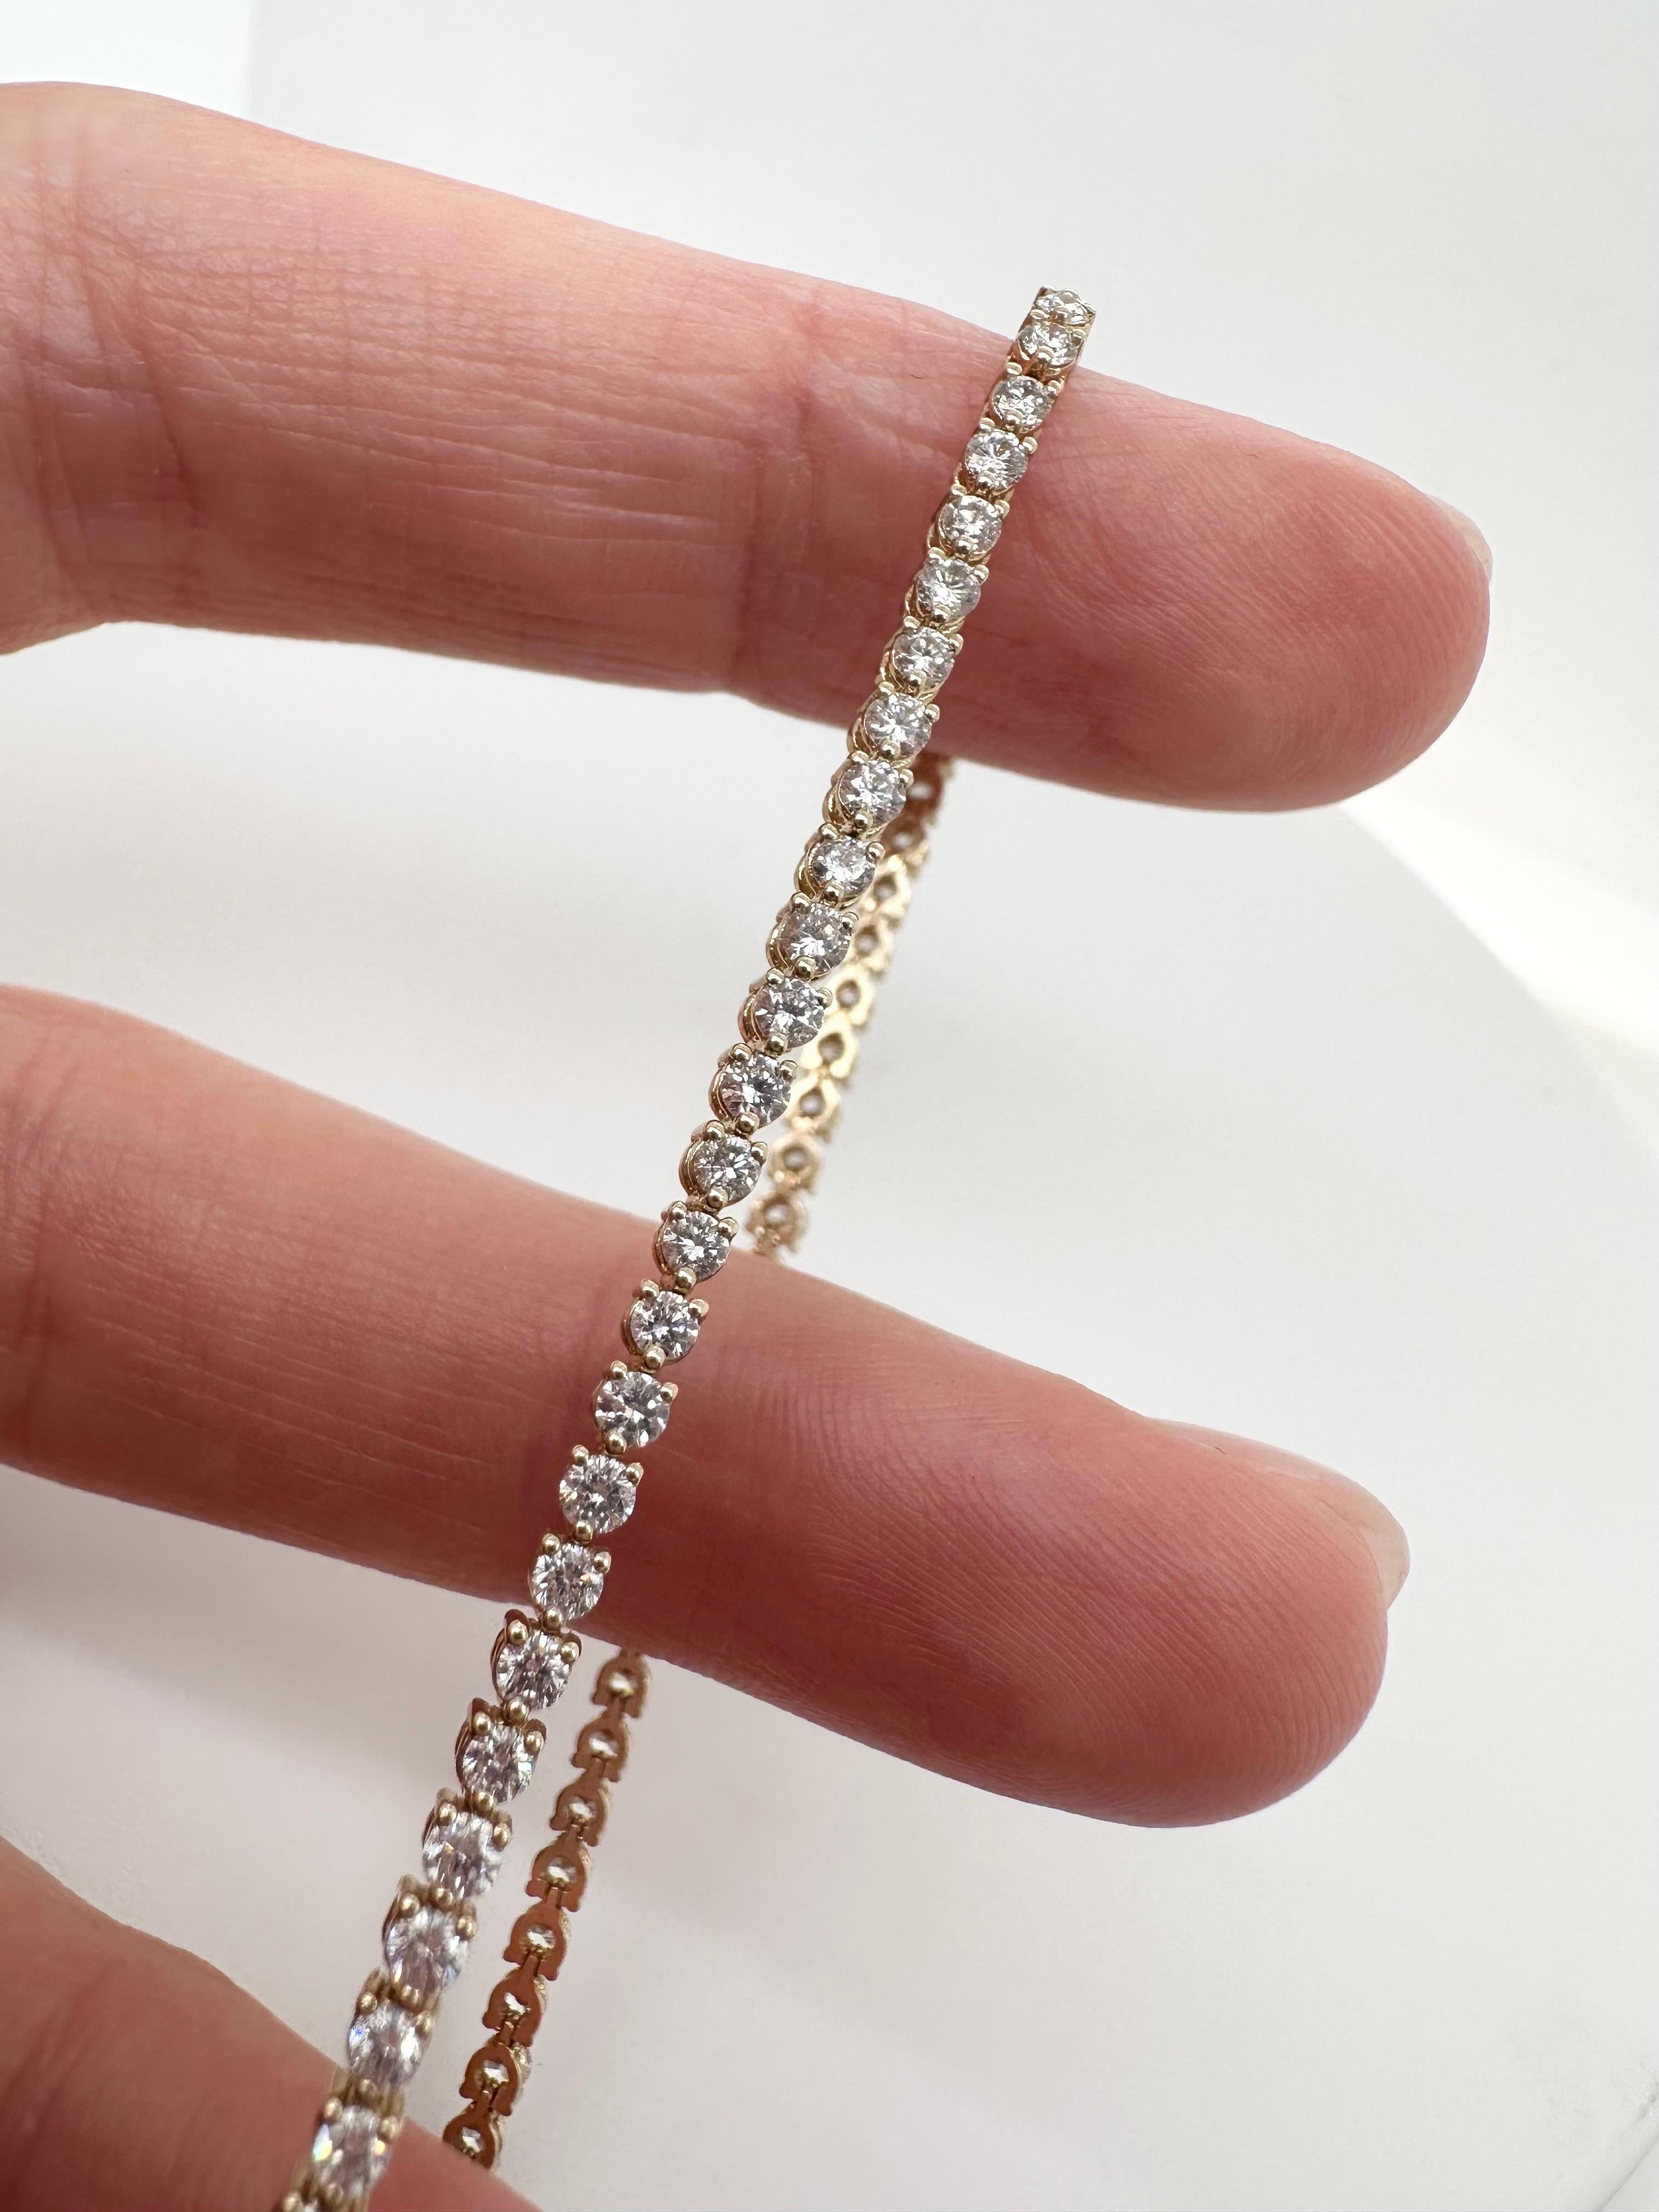 14kt tennis bracelet made with 2.30 carats of diamonds Si clarity, G color, 8 grams of gold and classical four prong setting.
Certificate of authenticity comes with purchase!

ABOUT US
We are a family-owned business. Our studio in located in the